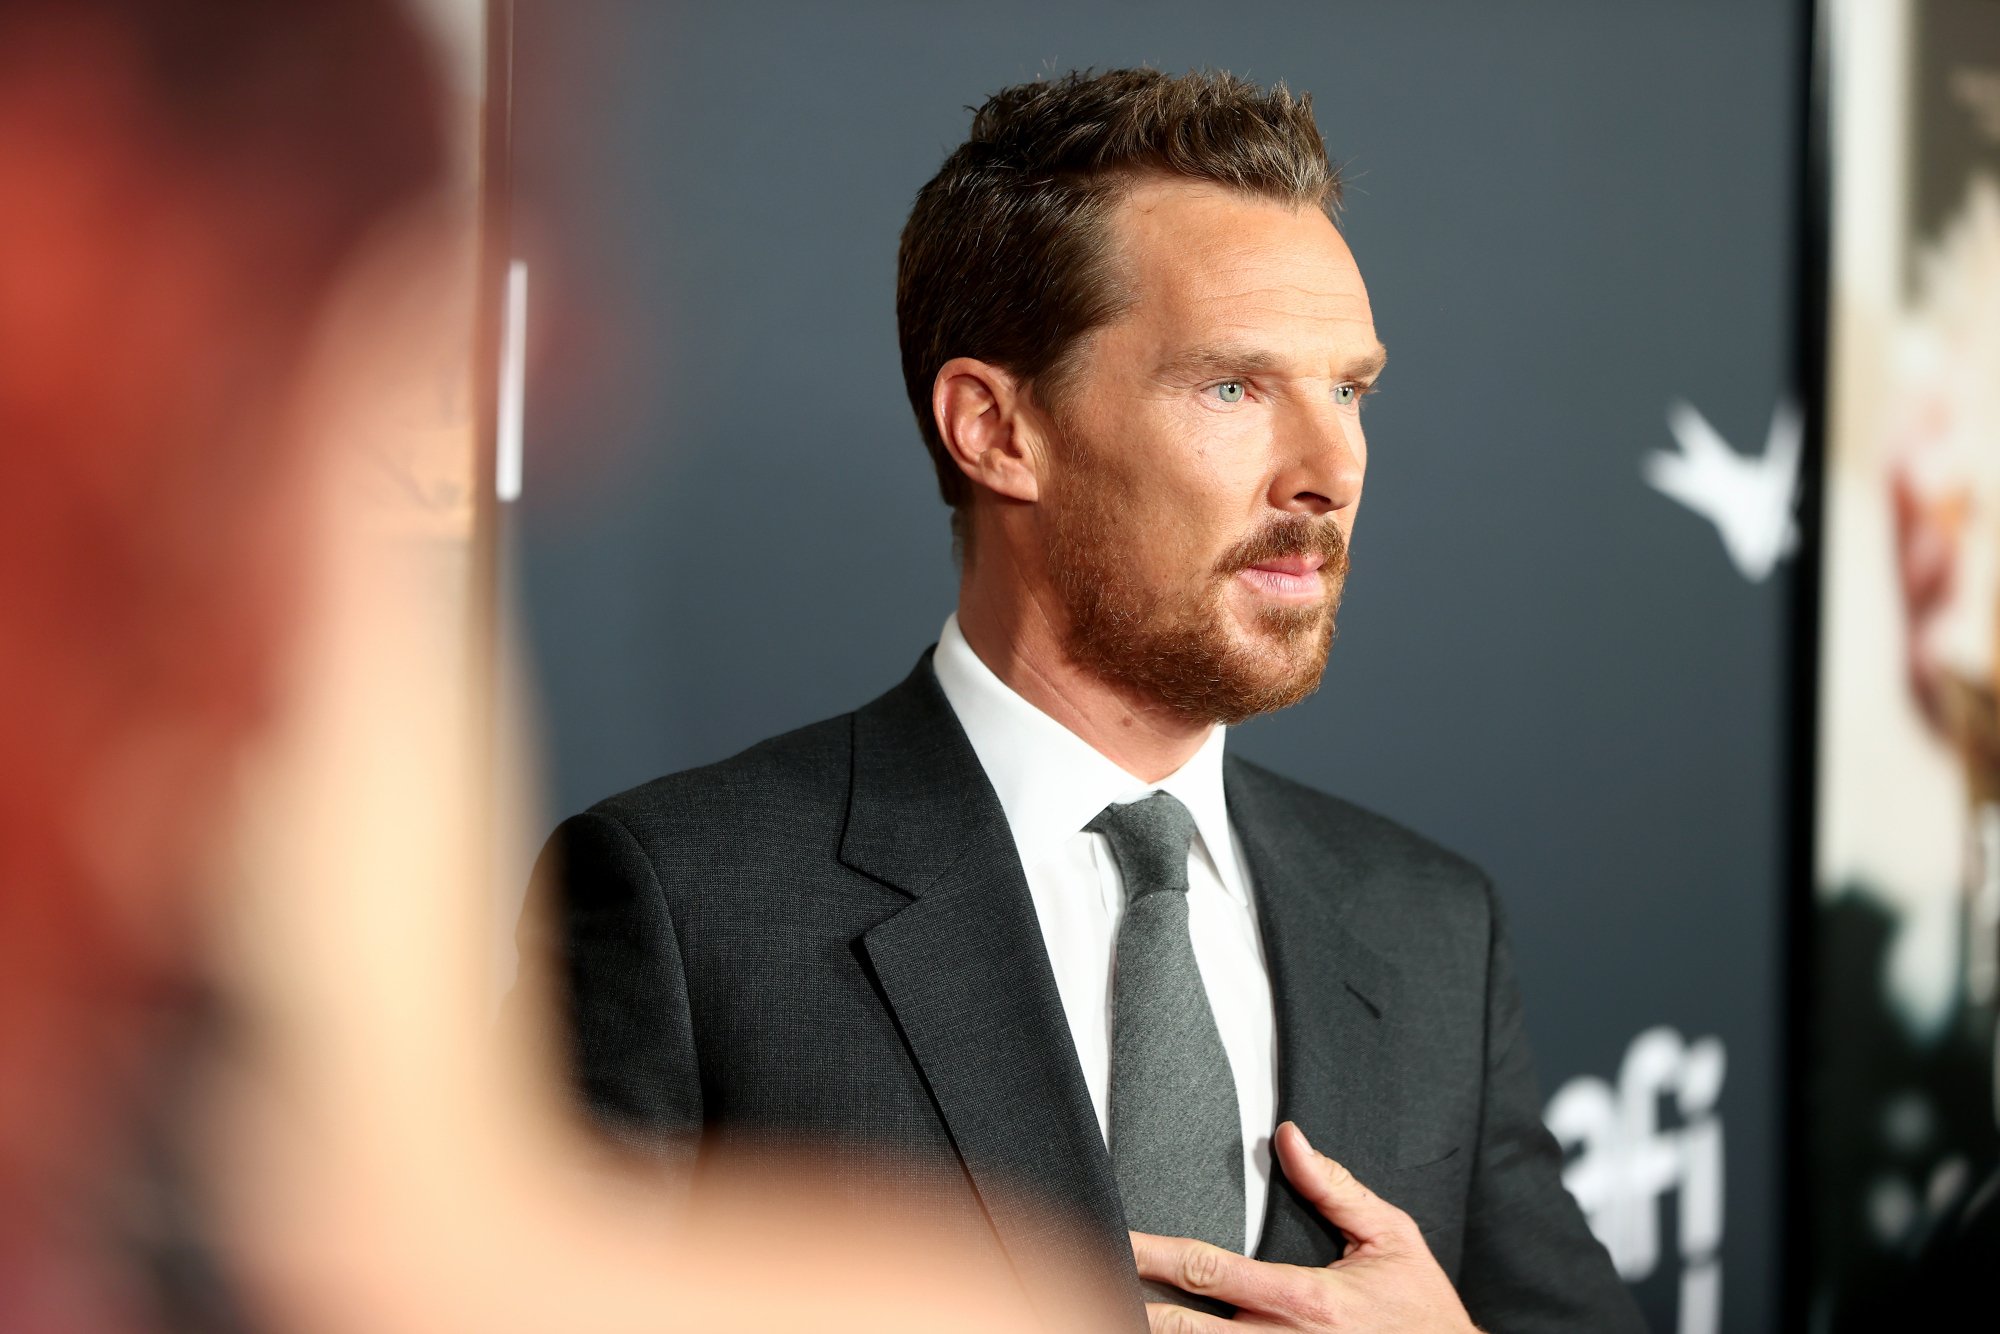 'The Power of the Dog' actor Benedict Cumberbatch wearing a suit in front of an AFI step and repeat